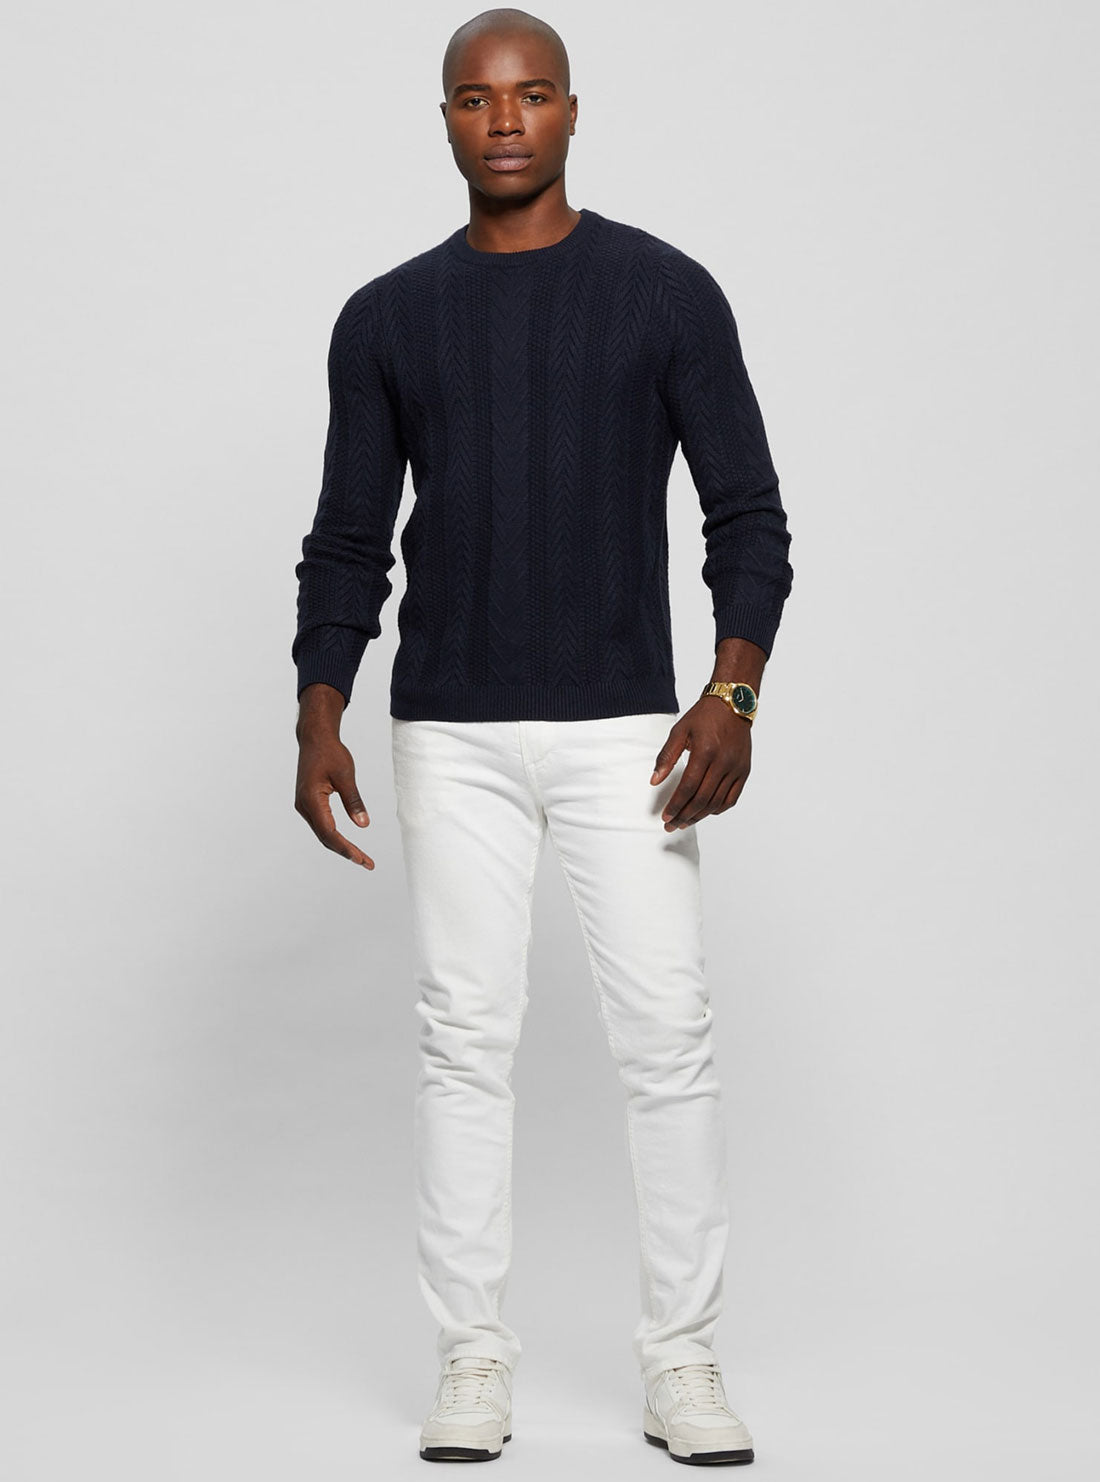 Navy Blue Cable Ethan Knit Top | GUESS Men's Apparel | full view